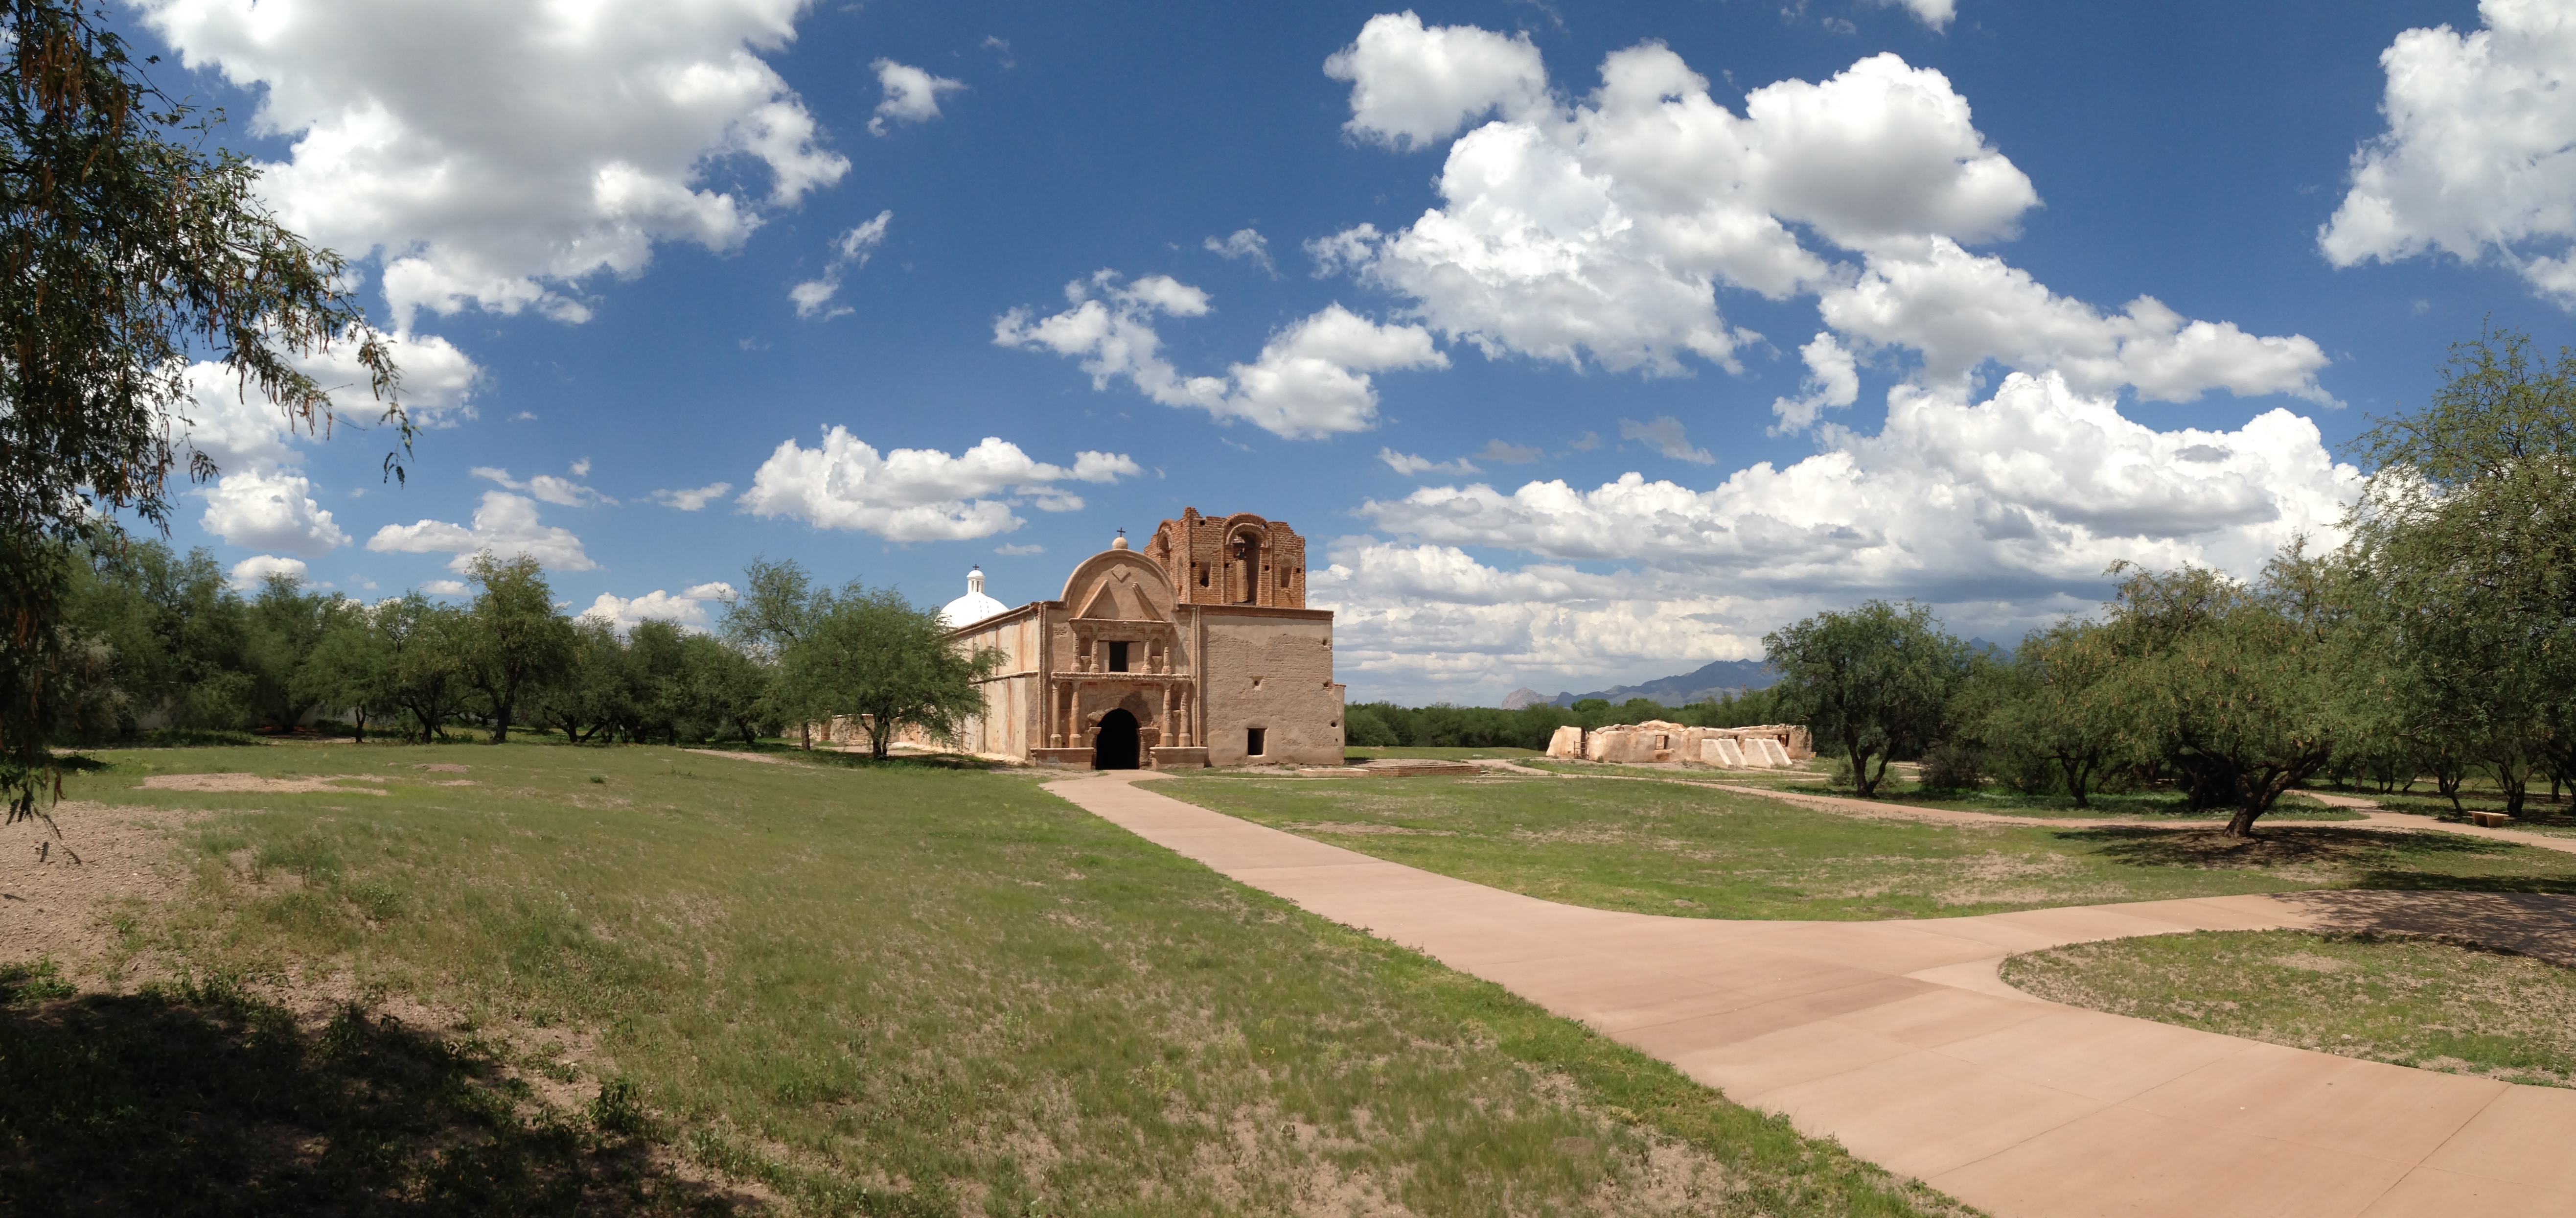 panorama of mission church with green grass and clouds